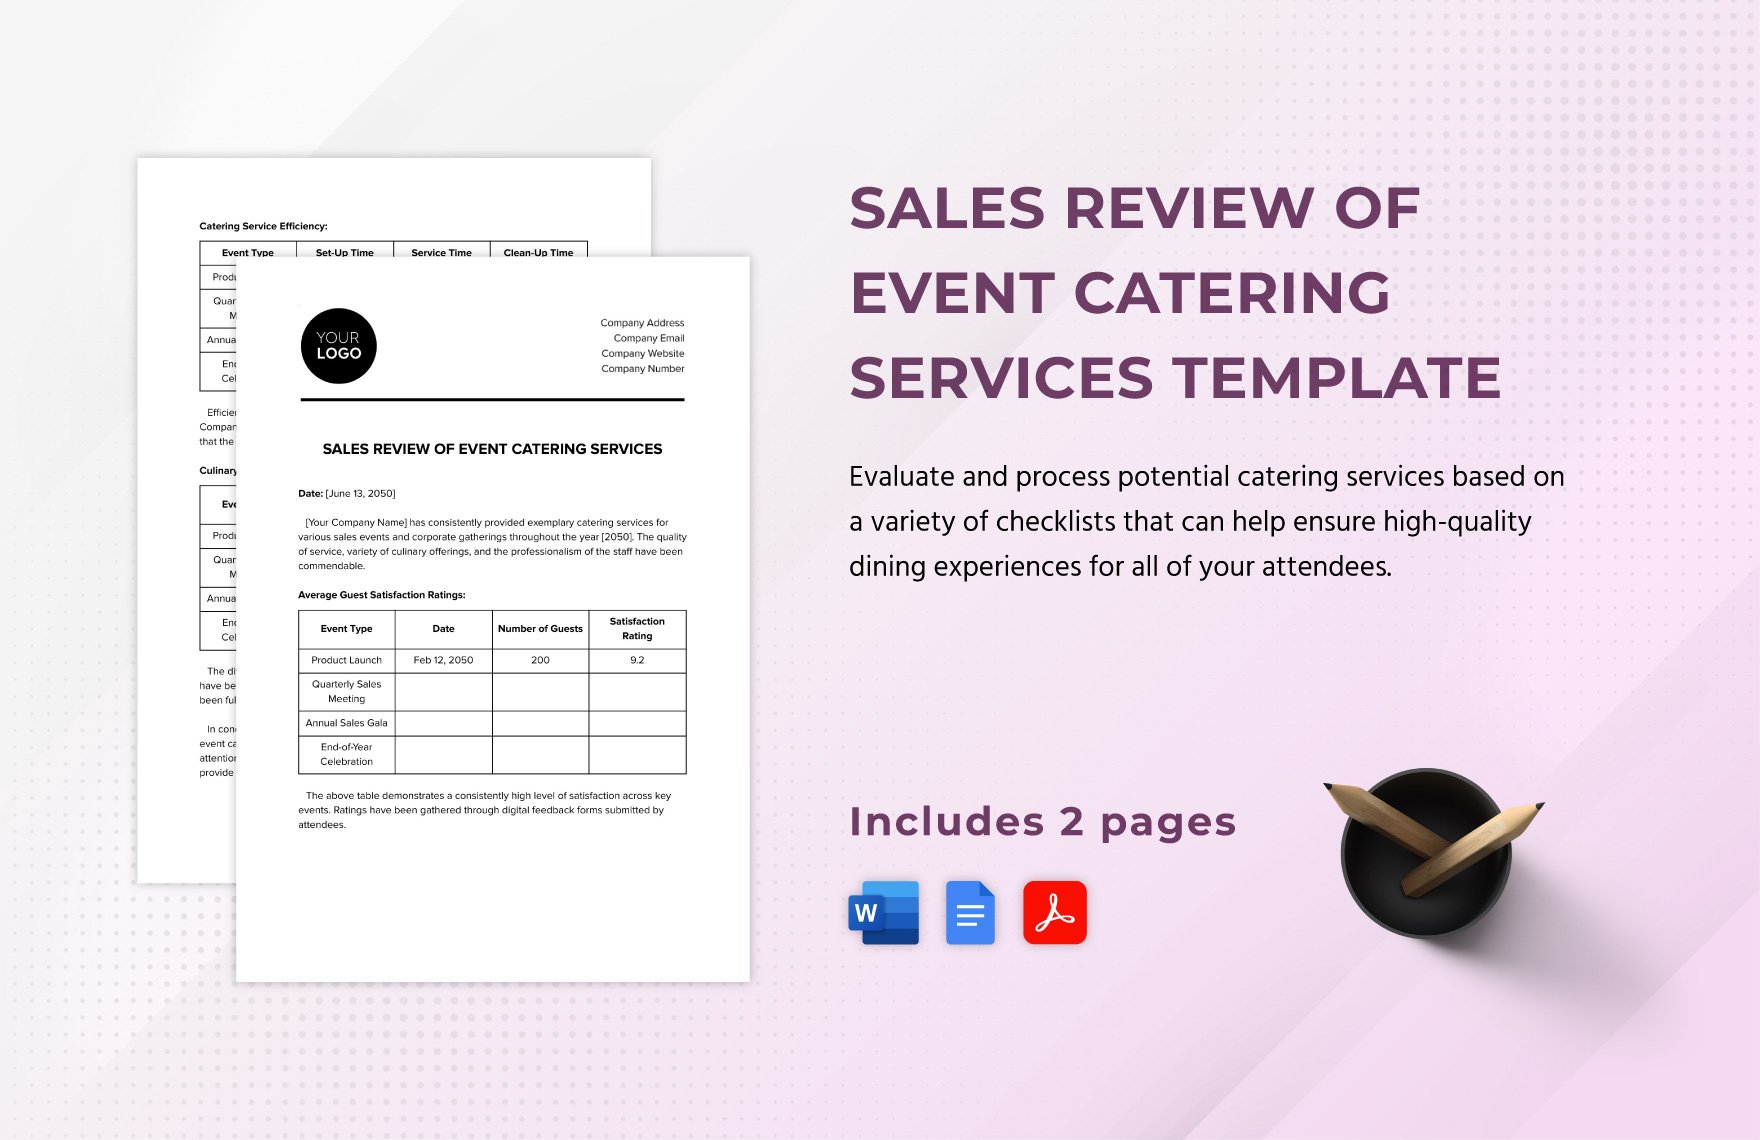 Sales Review of Event Catering Services Template